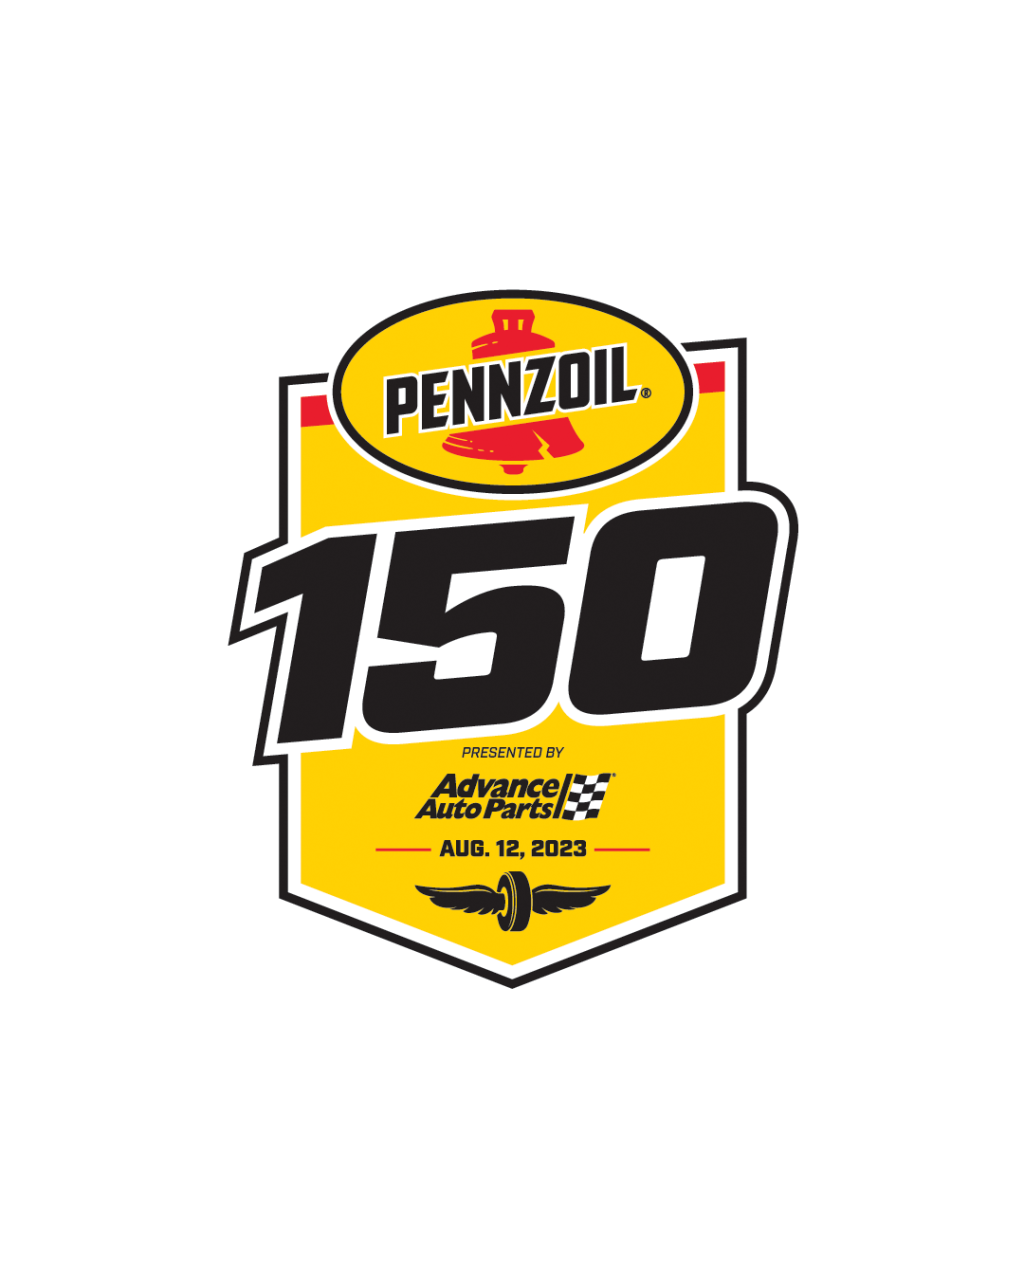 Pennzoil 150 Presented by Advance Auto Parts Preview